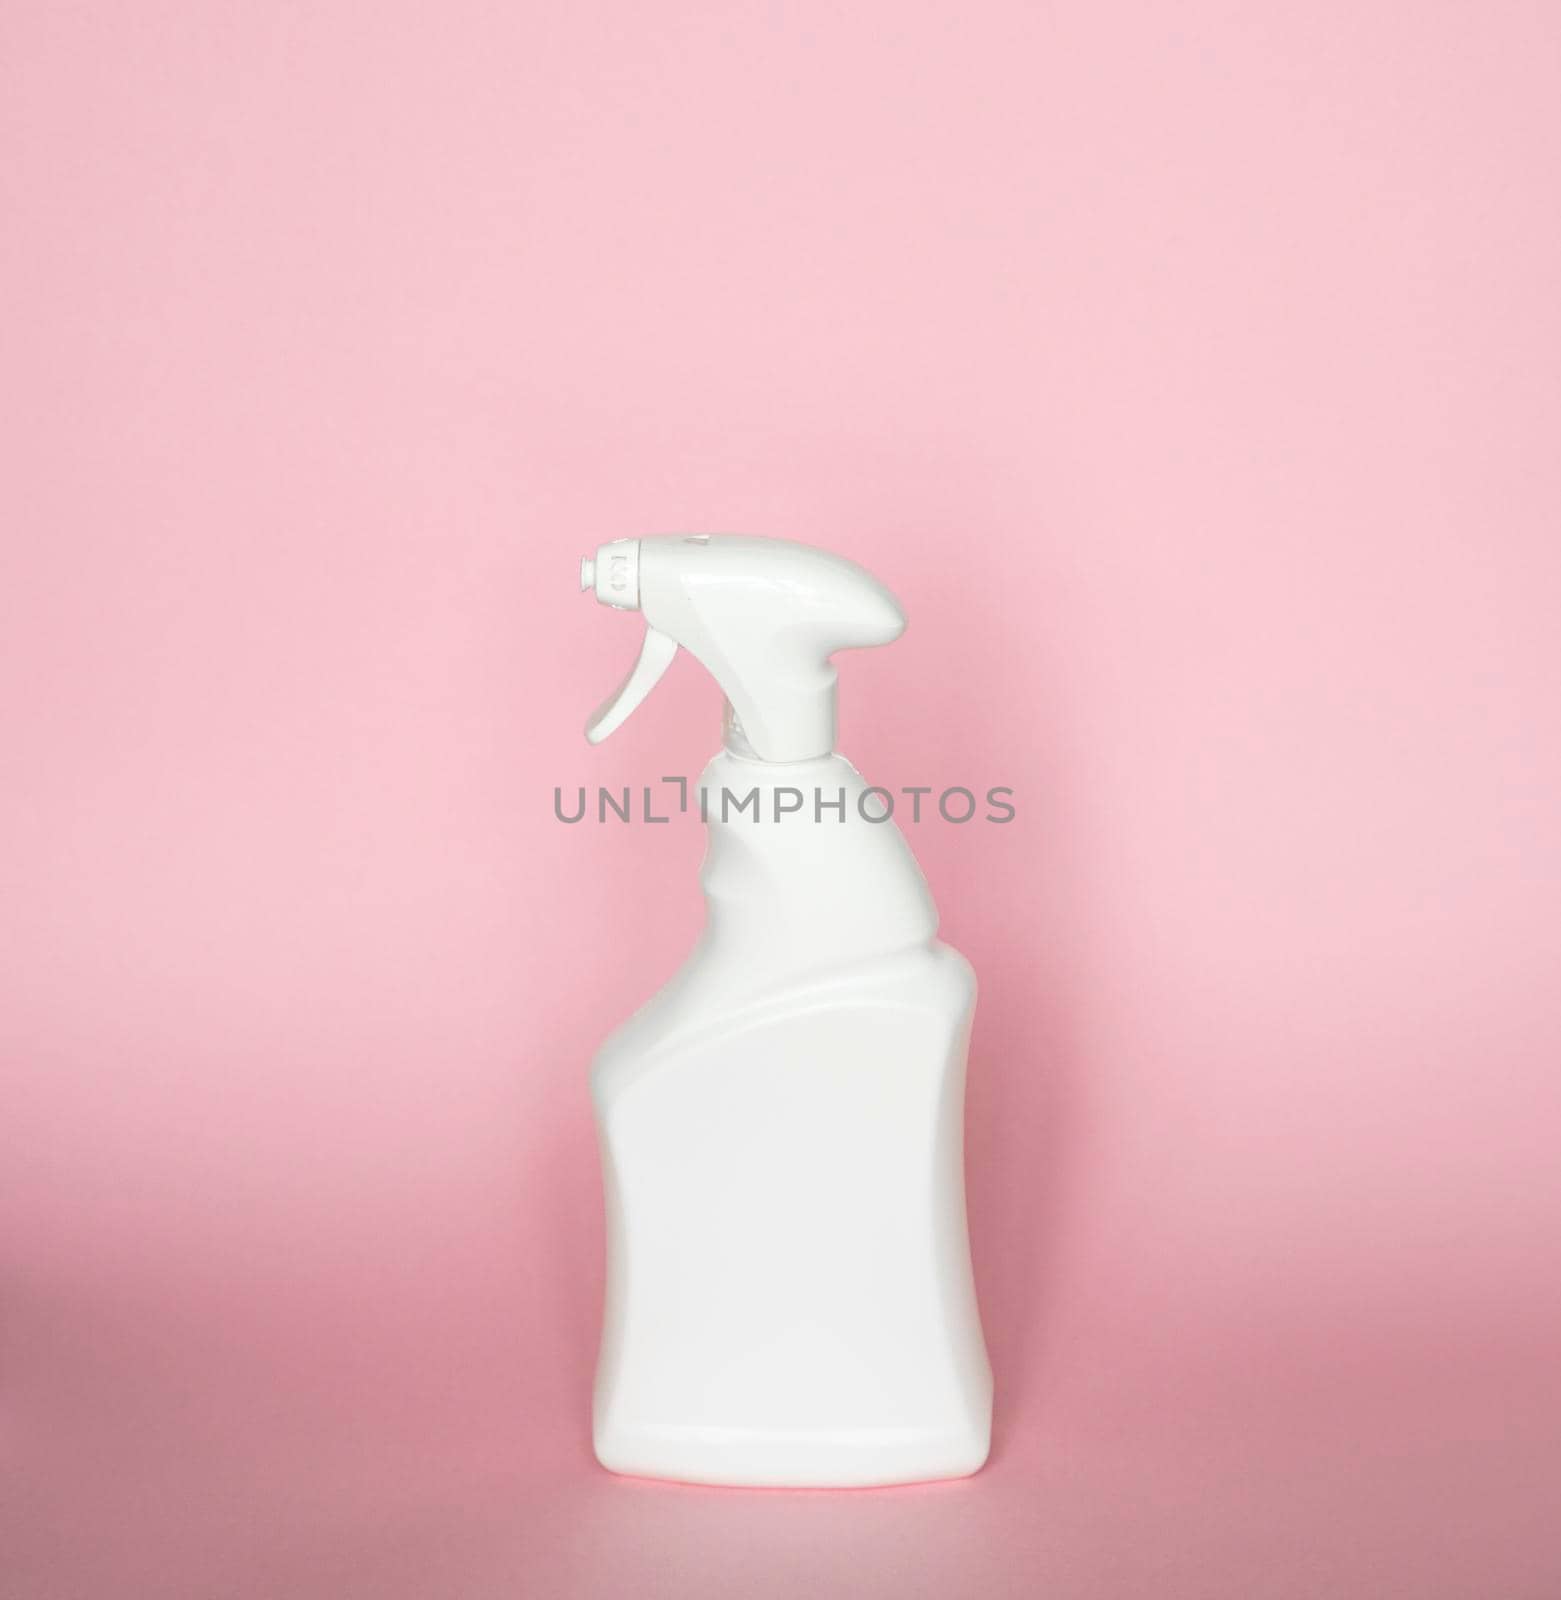 White detergent bottles or chemical cleaning supplies with a sprayer isolated on pink background